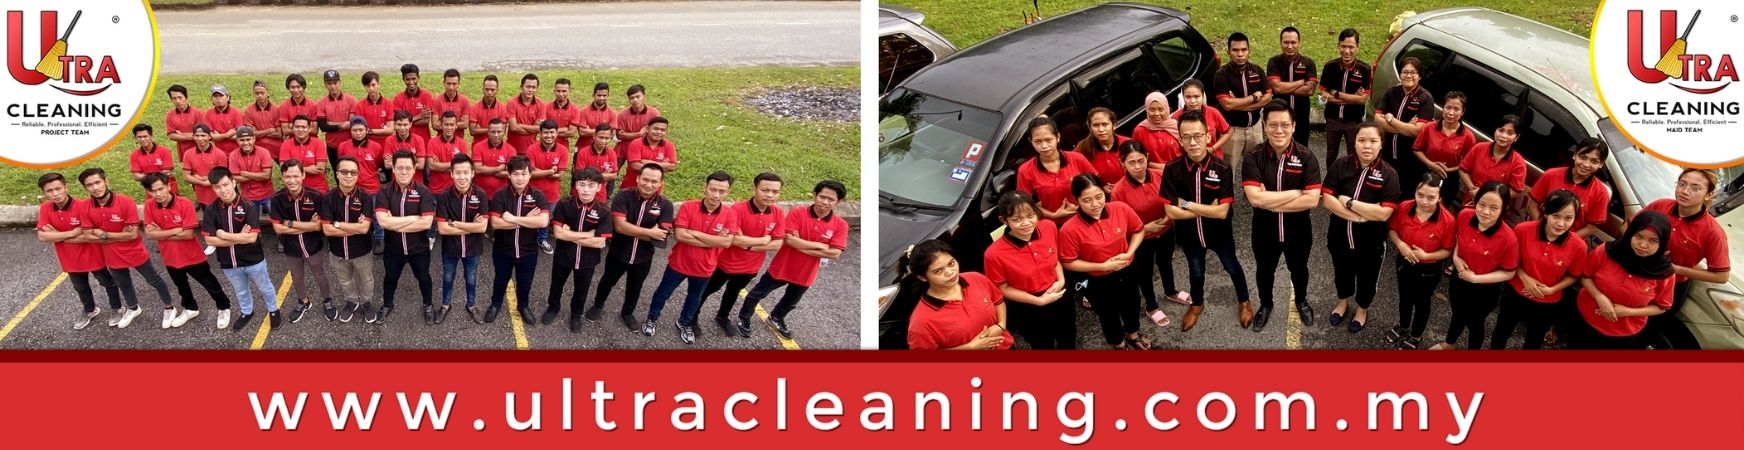 Ultra Cleaning Team Picture